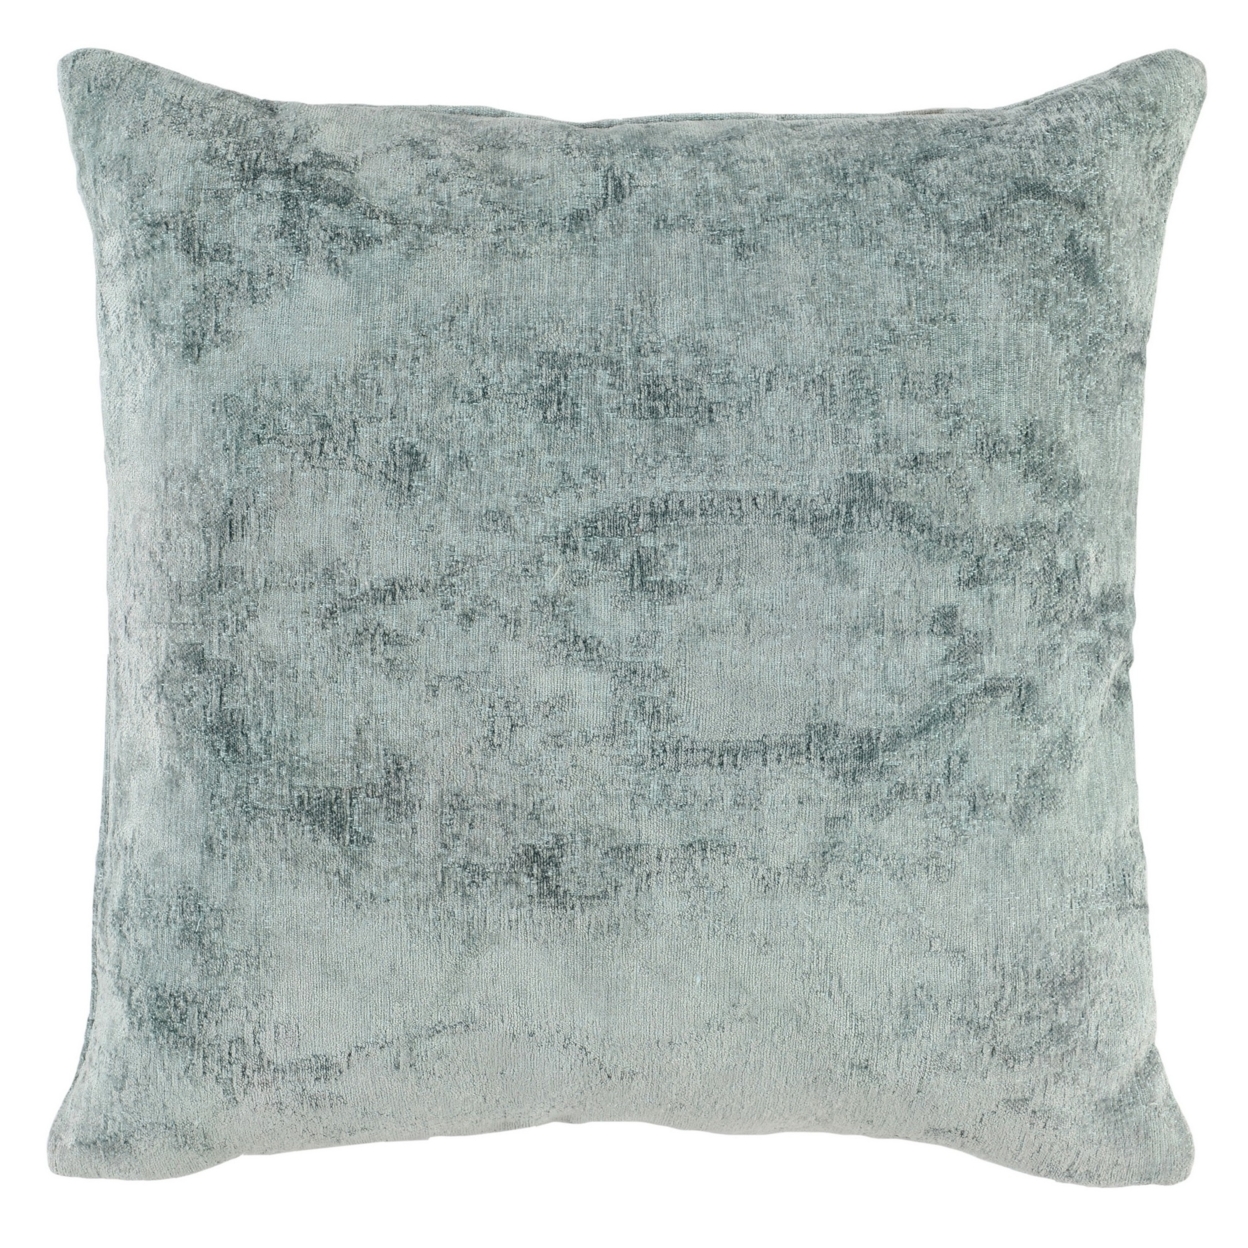 Piper 22 Inch Square Accent Throw Pillow, Handcrafted Sage Green Jacquard - Saltoro Sherpi